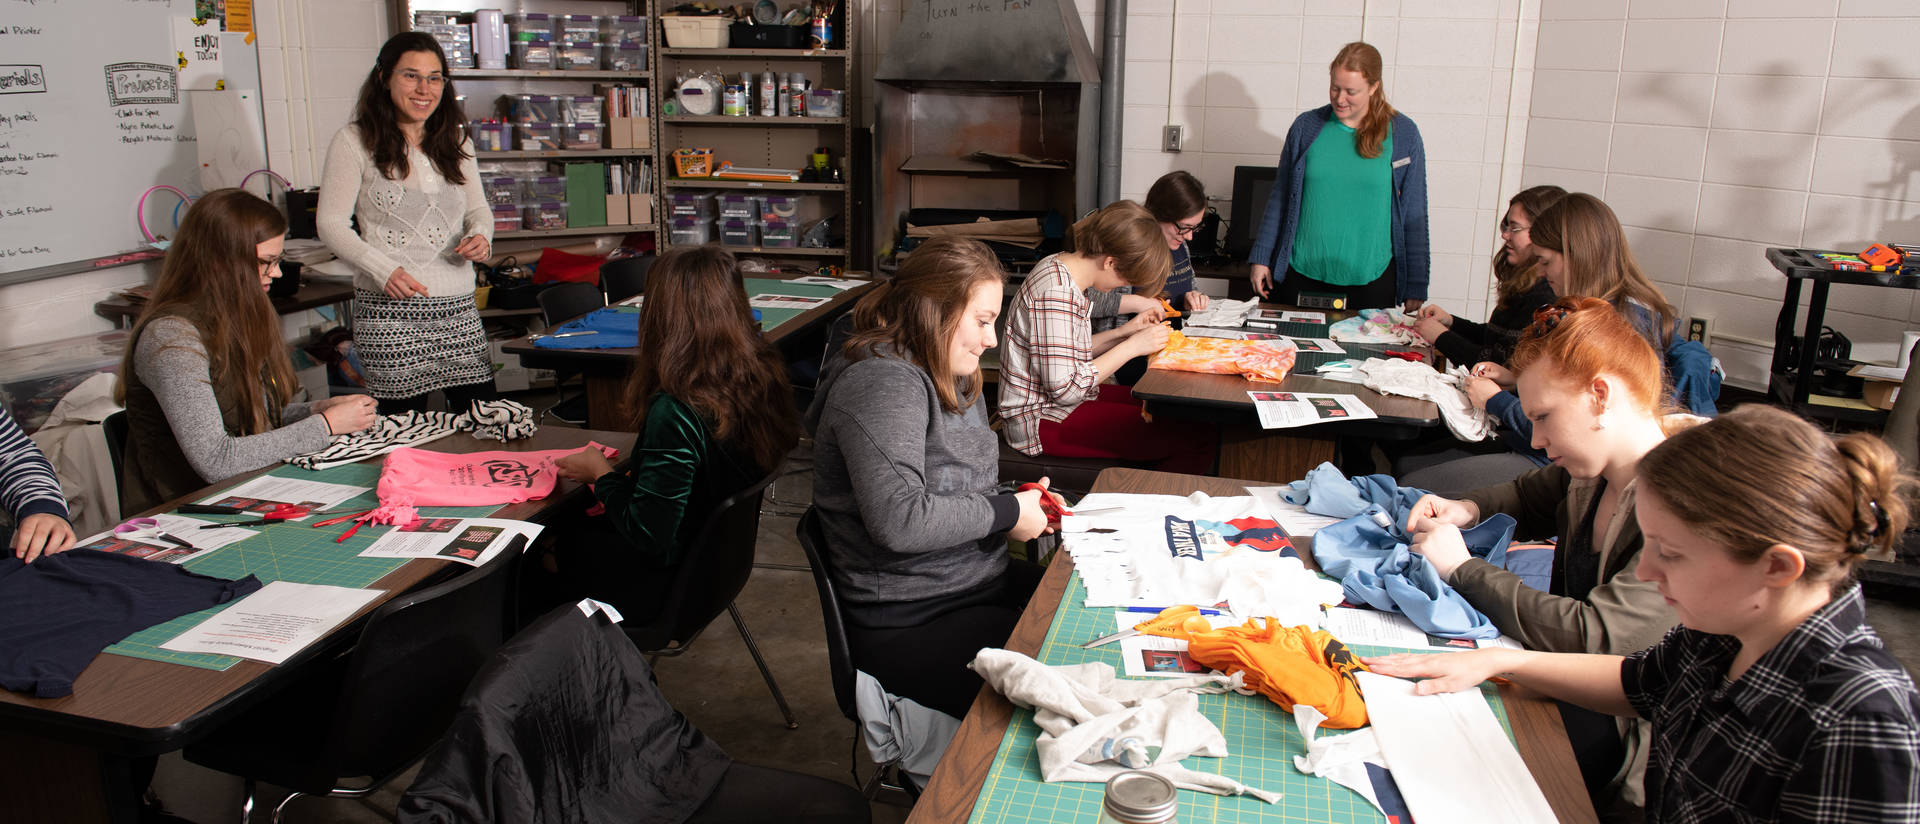 UW-Eau Claire French students creating projects in makerspace